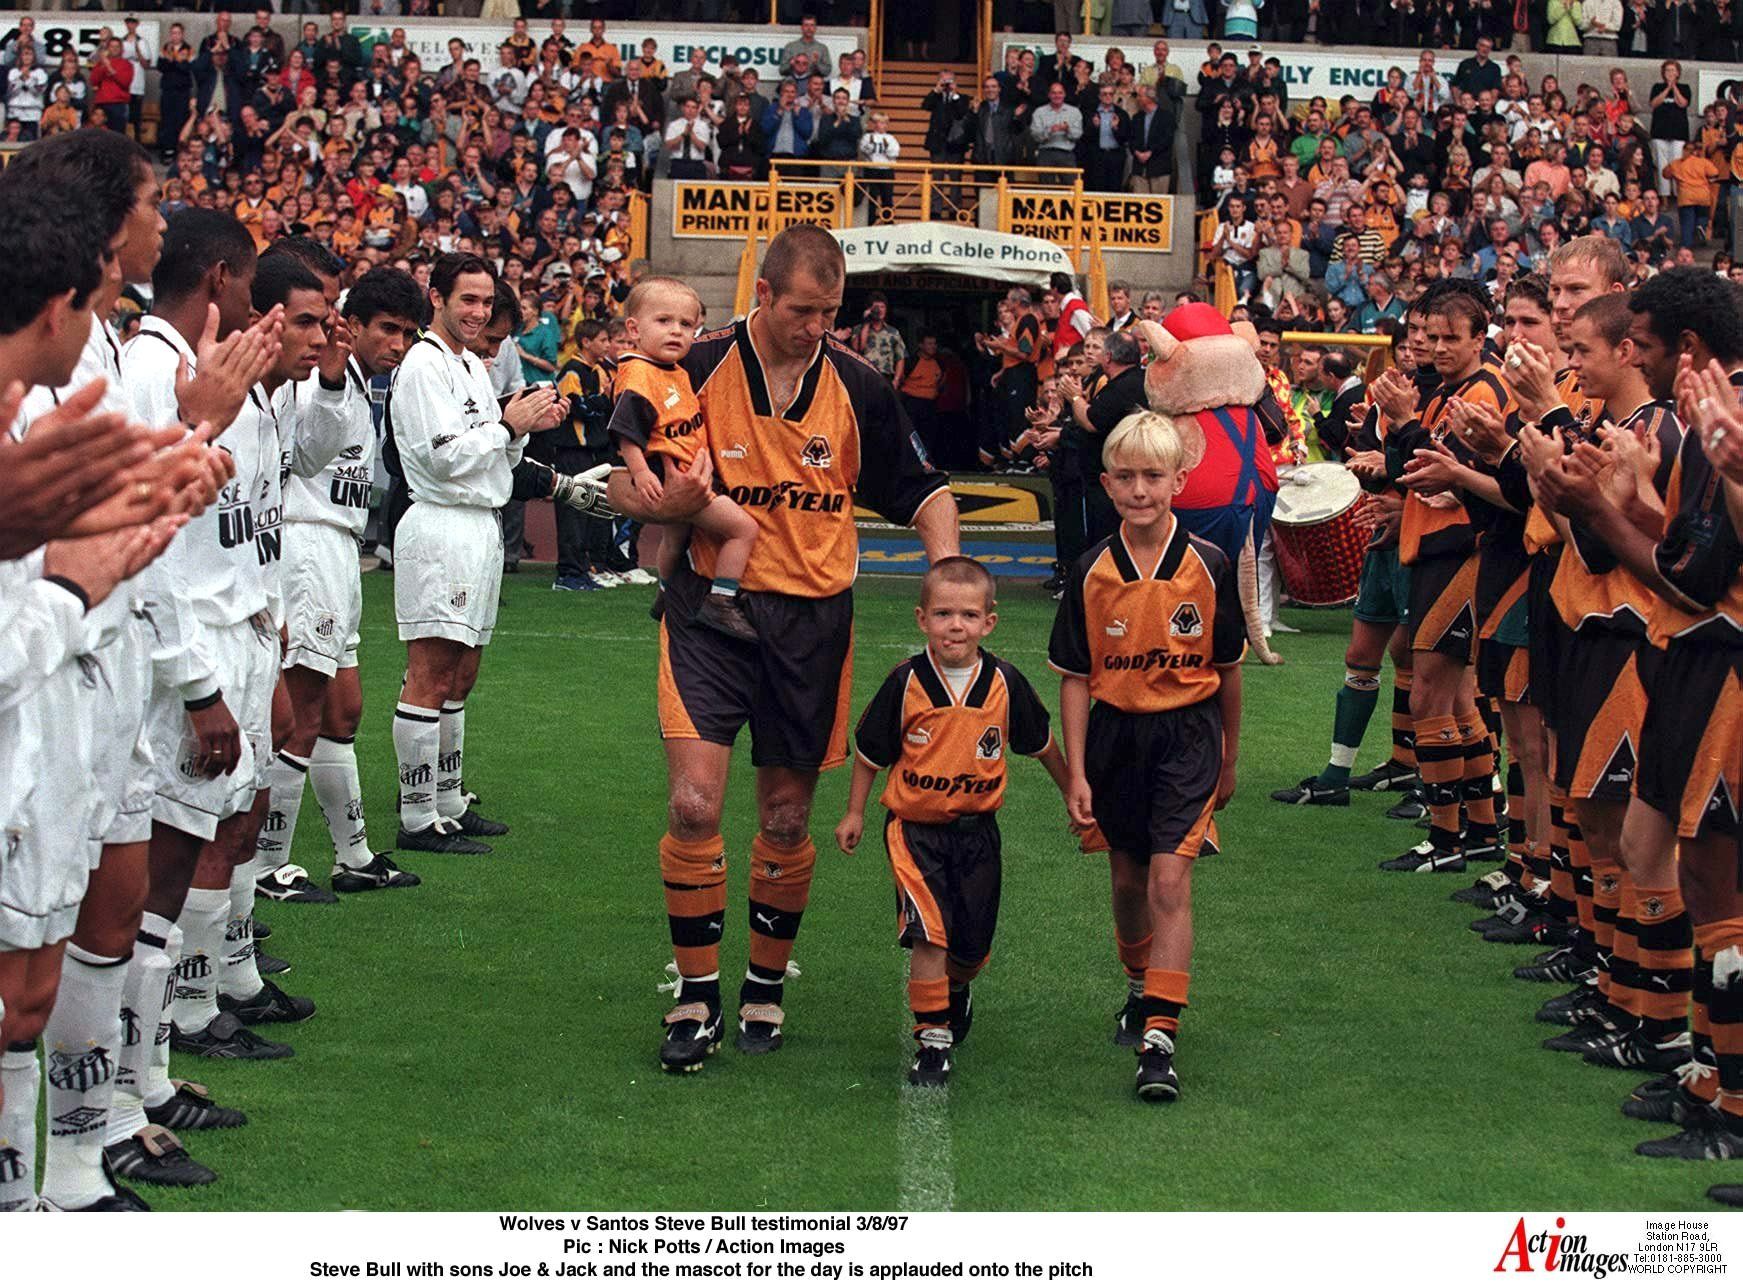 Wolves v Santos Steve Bull testimonial 3/8/97 
Pic : Nick Potts / Action Images 
Steve Bull with sons Joe &amp; Jack and the mascot for the day is applauded onto the pitch  
wolverhampton wanderers